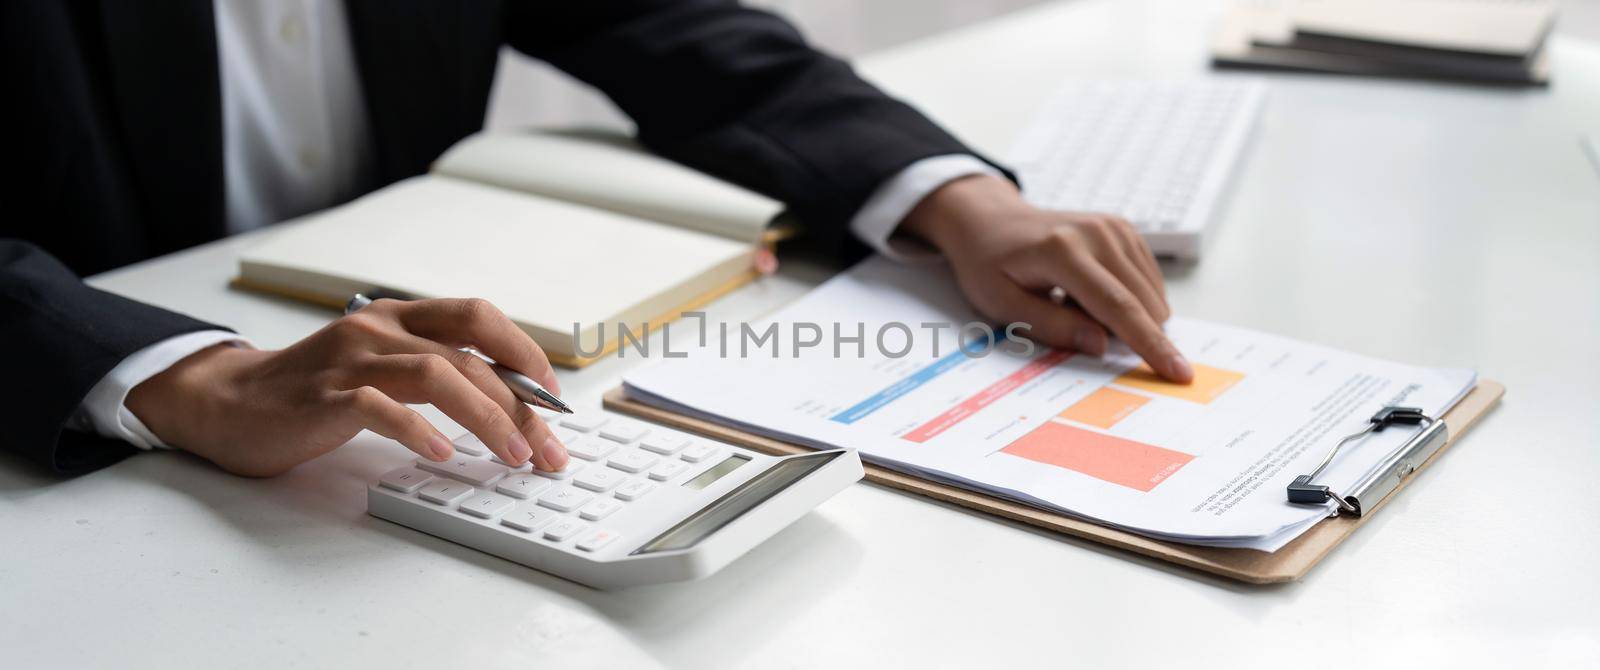 Close up of businessman or accountant hand holding pen working on calculator to calculate business data, accountancy document and laptop computer at office, business concept.